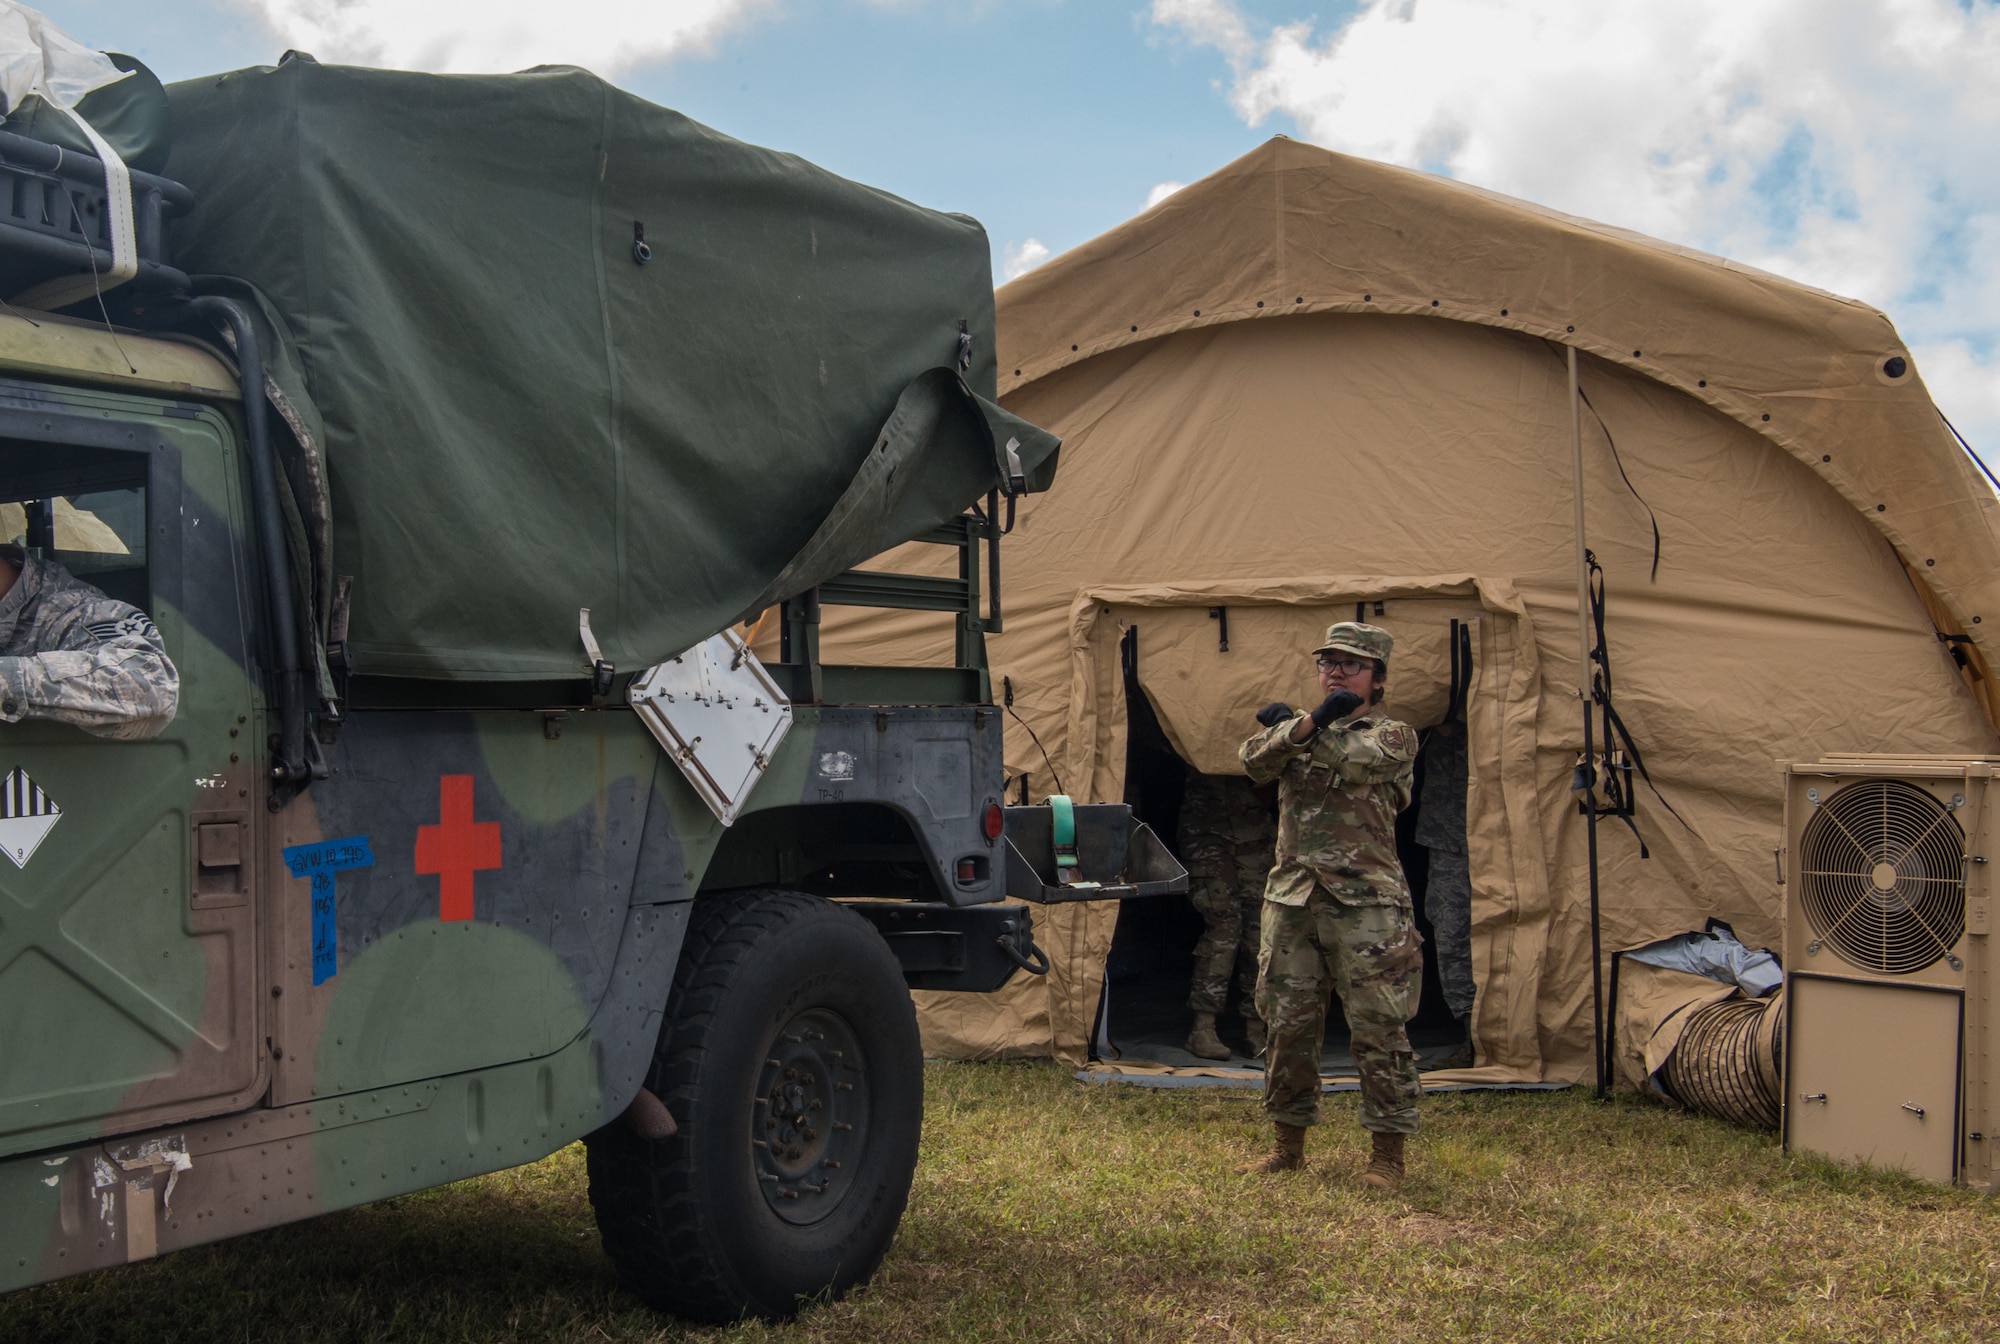 U.S. Air Force Staff Sgt. Christine Ebio assigned to the 18th Medical Group, Kadena Air Base, Japan, directs a Humvee for a patient transport during a Cope North 20 (CN20) mass casualty exercise at Rota, U.S. Commonwealth of the Northern Mariana Islands, Feb 20, 2020. Service members from the U.S., Royal Australian Air force, and Koku Jieitai (Japan Air Self-Defense Force) honed their Humanitarian Assistance and Disaster Relief (HADR) skills by providing emergency medical care for simulated patients. Cope North enhances U.S. relations with regional allies and partners by demonstrating resolve to promote security and stability throughout the Indo-Pacific. (U.S. Air Force photo by Staff Sgt. Curt Beach)